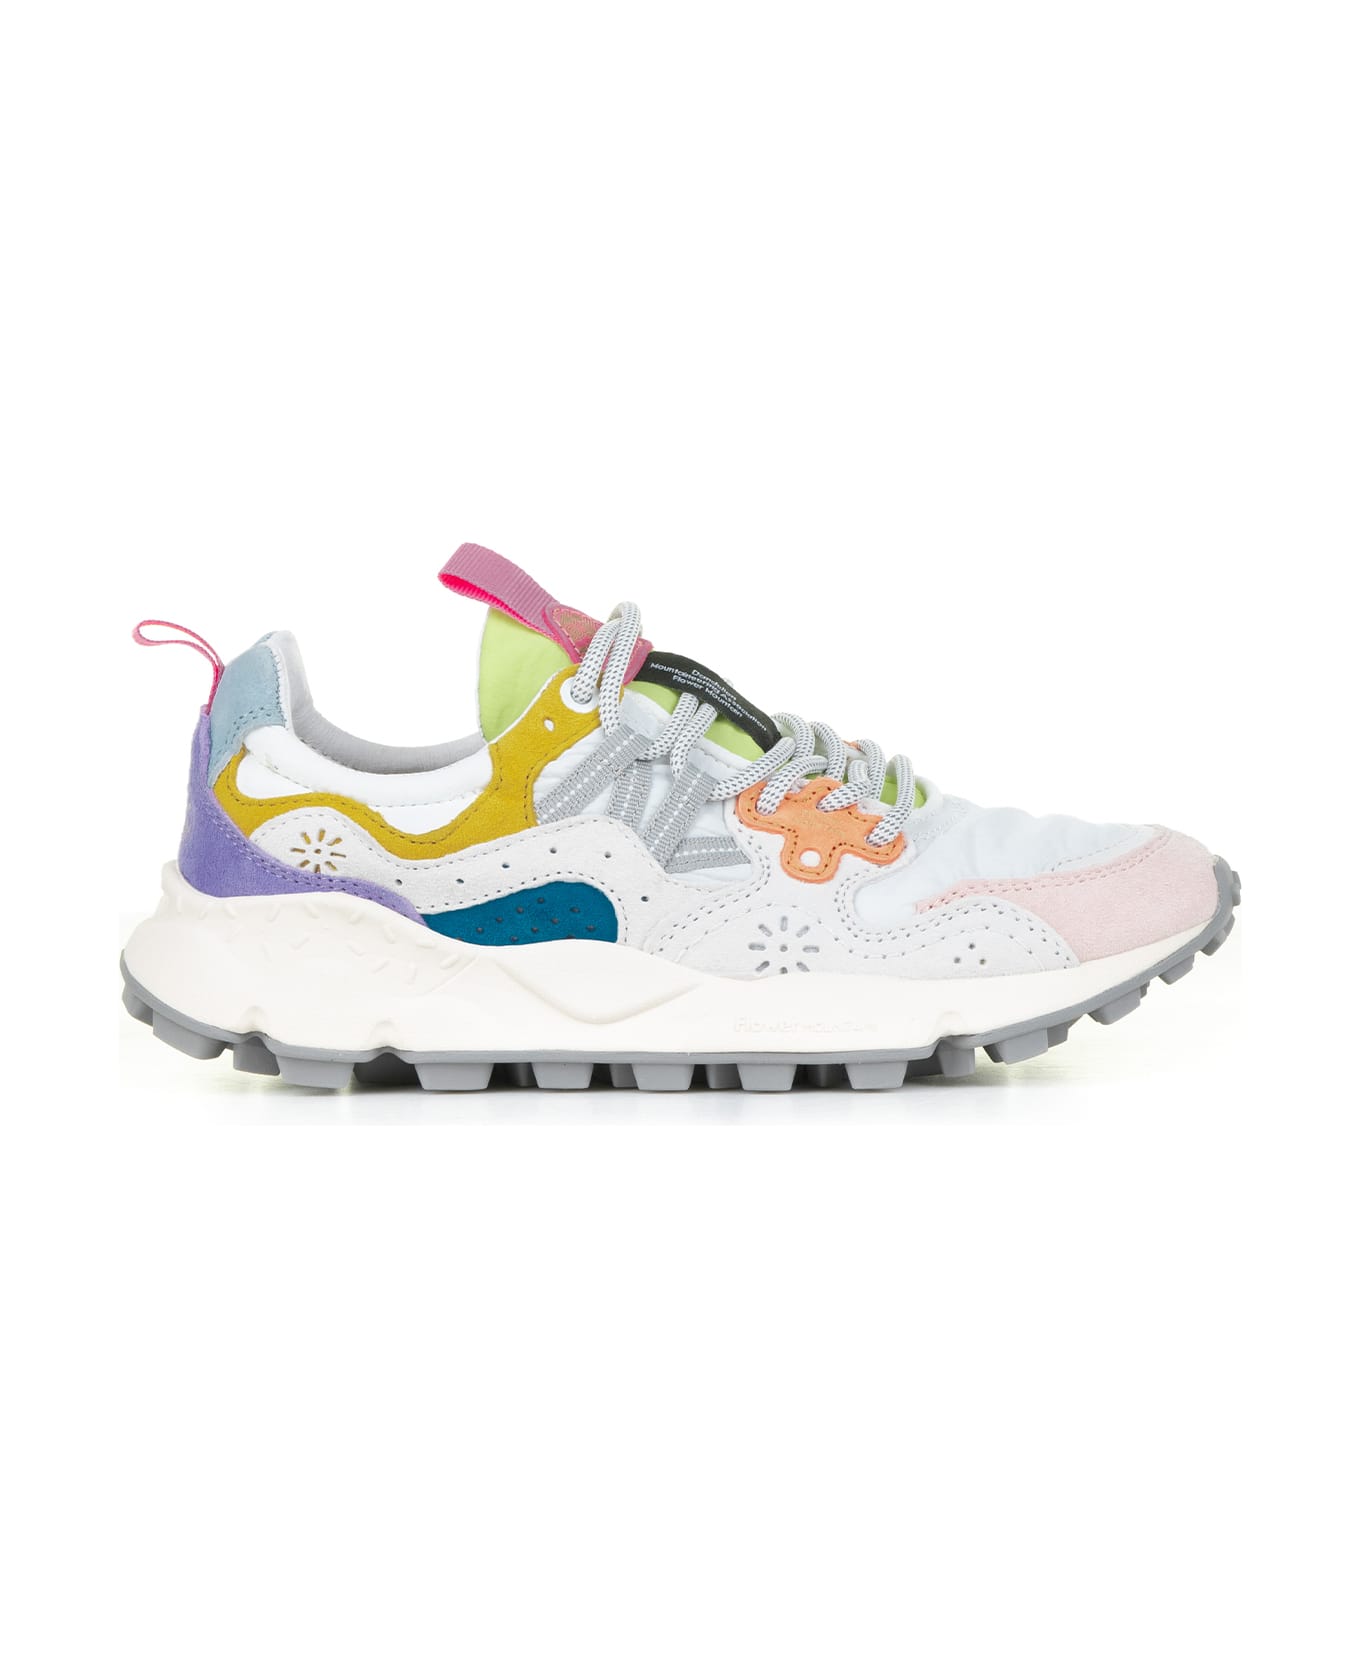 Flower Mountain Multicolored Yamano Sneakers In Suede And Nylon - WHITE PINK スニーカー